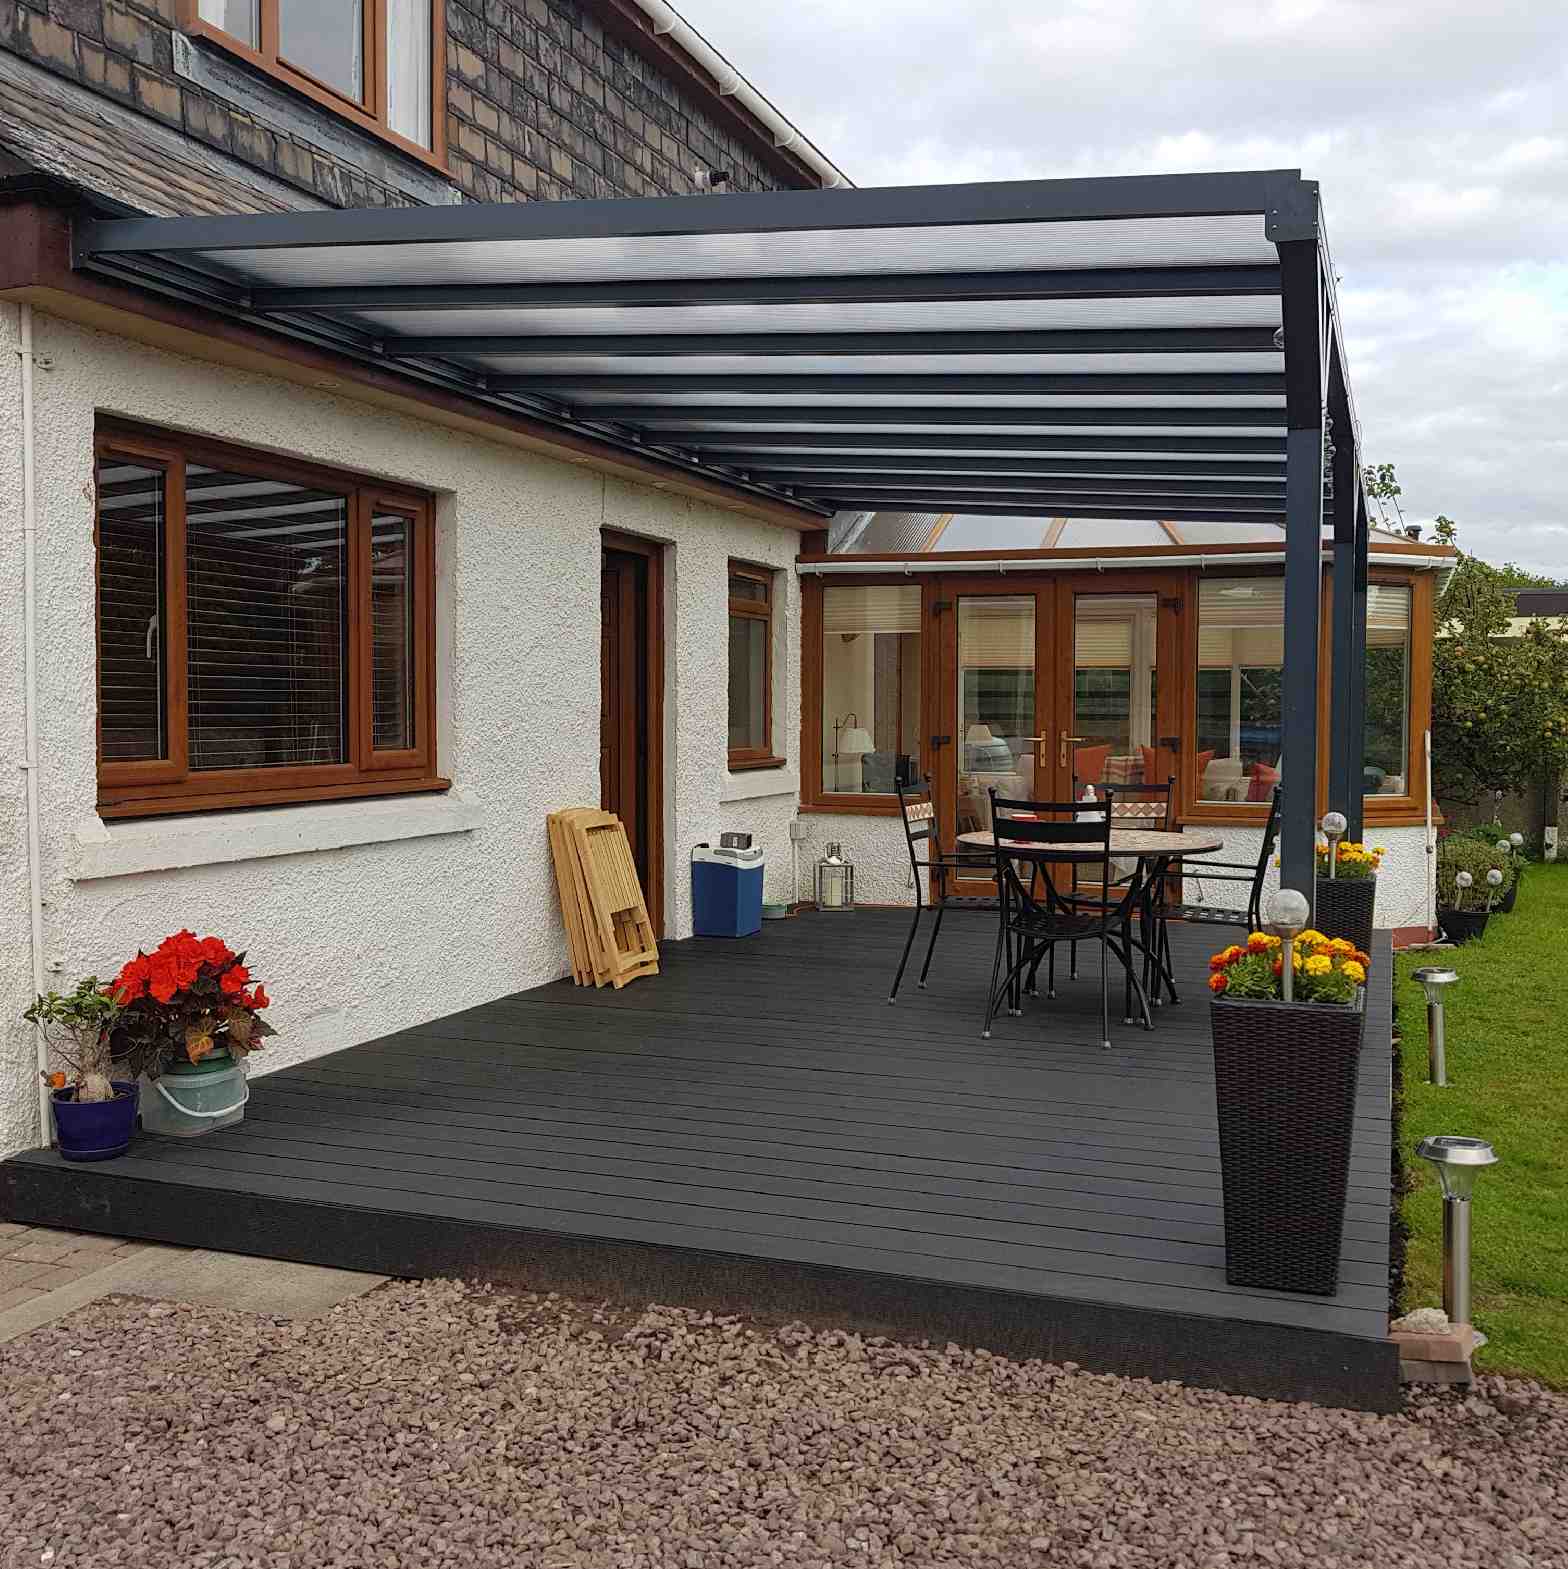 Buy Omega Verandah, Anthracite Grey, 6mm Glass Clear Plate Polycarbonate Glazing - 9.8m (W) x 3.5m (P), (5) Supporting Posts online today